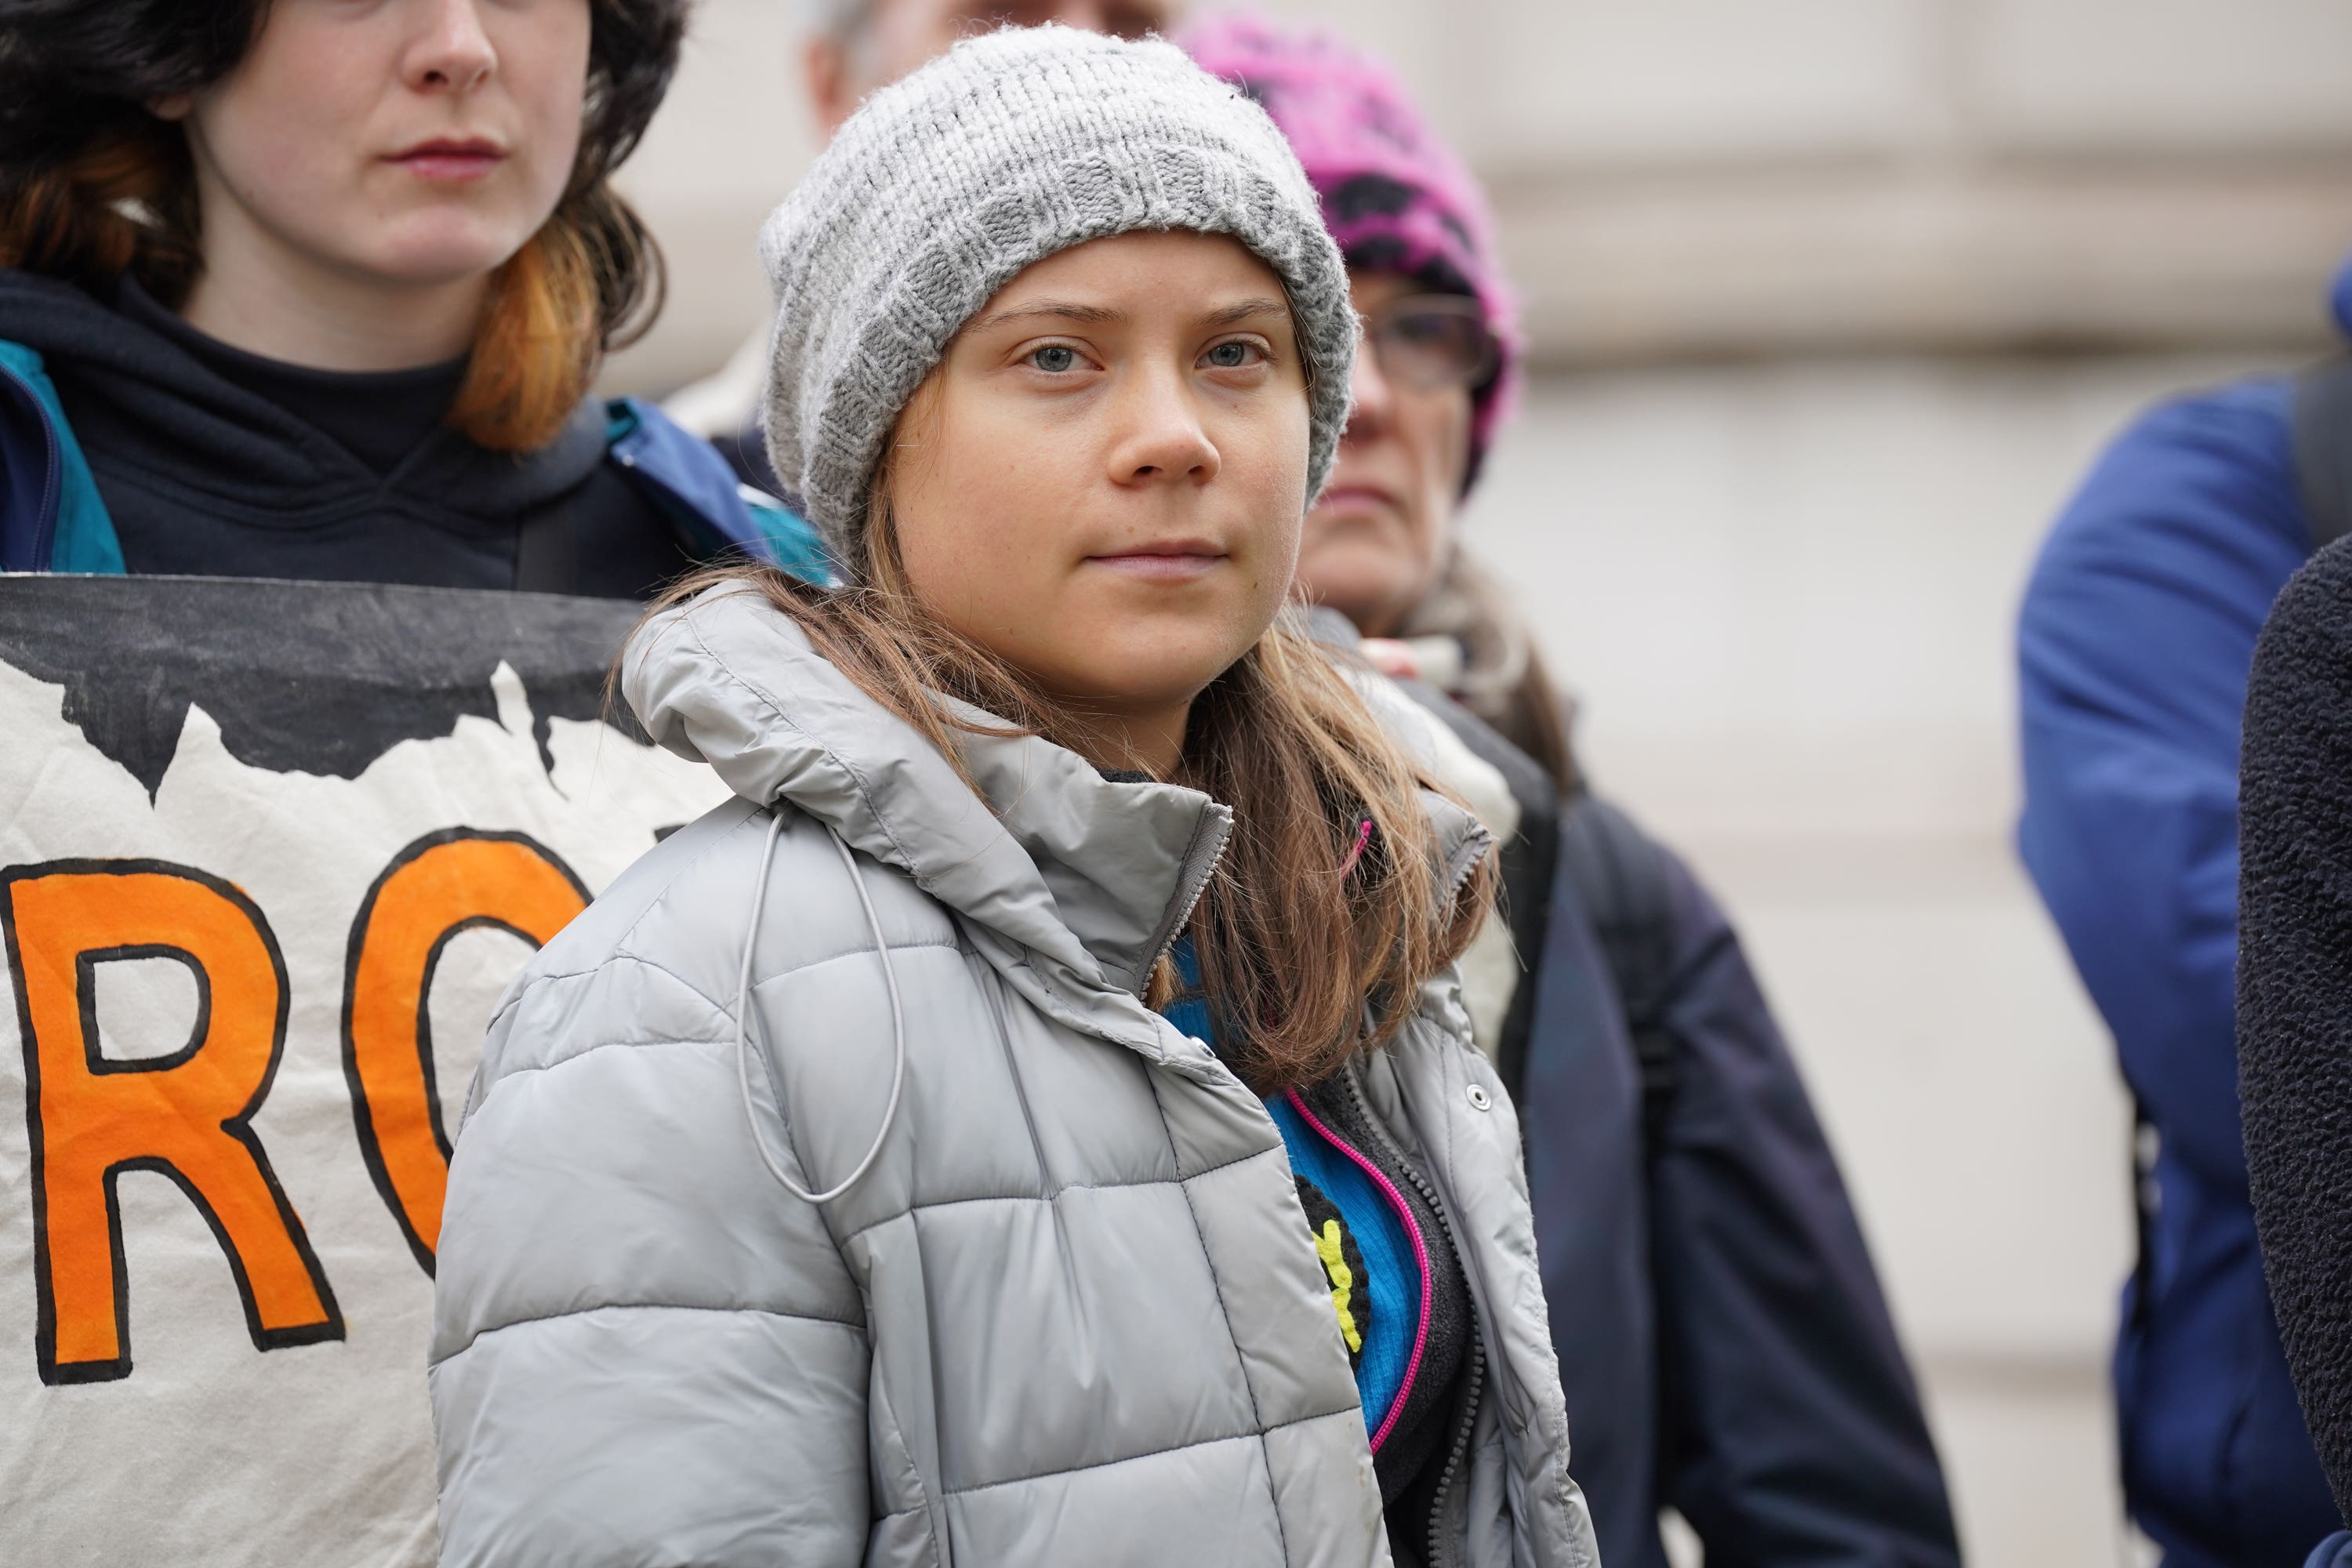 Greta Thunberg's Day in Court: The London Oil Conference Protest Trial - Greta Thunberg's Involvement and Arrest